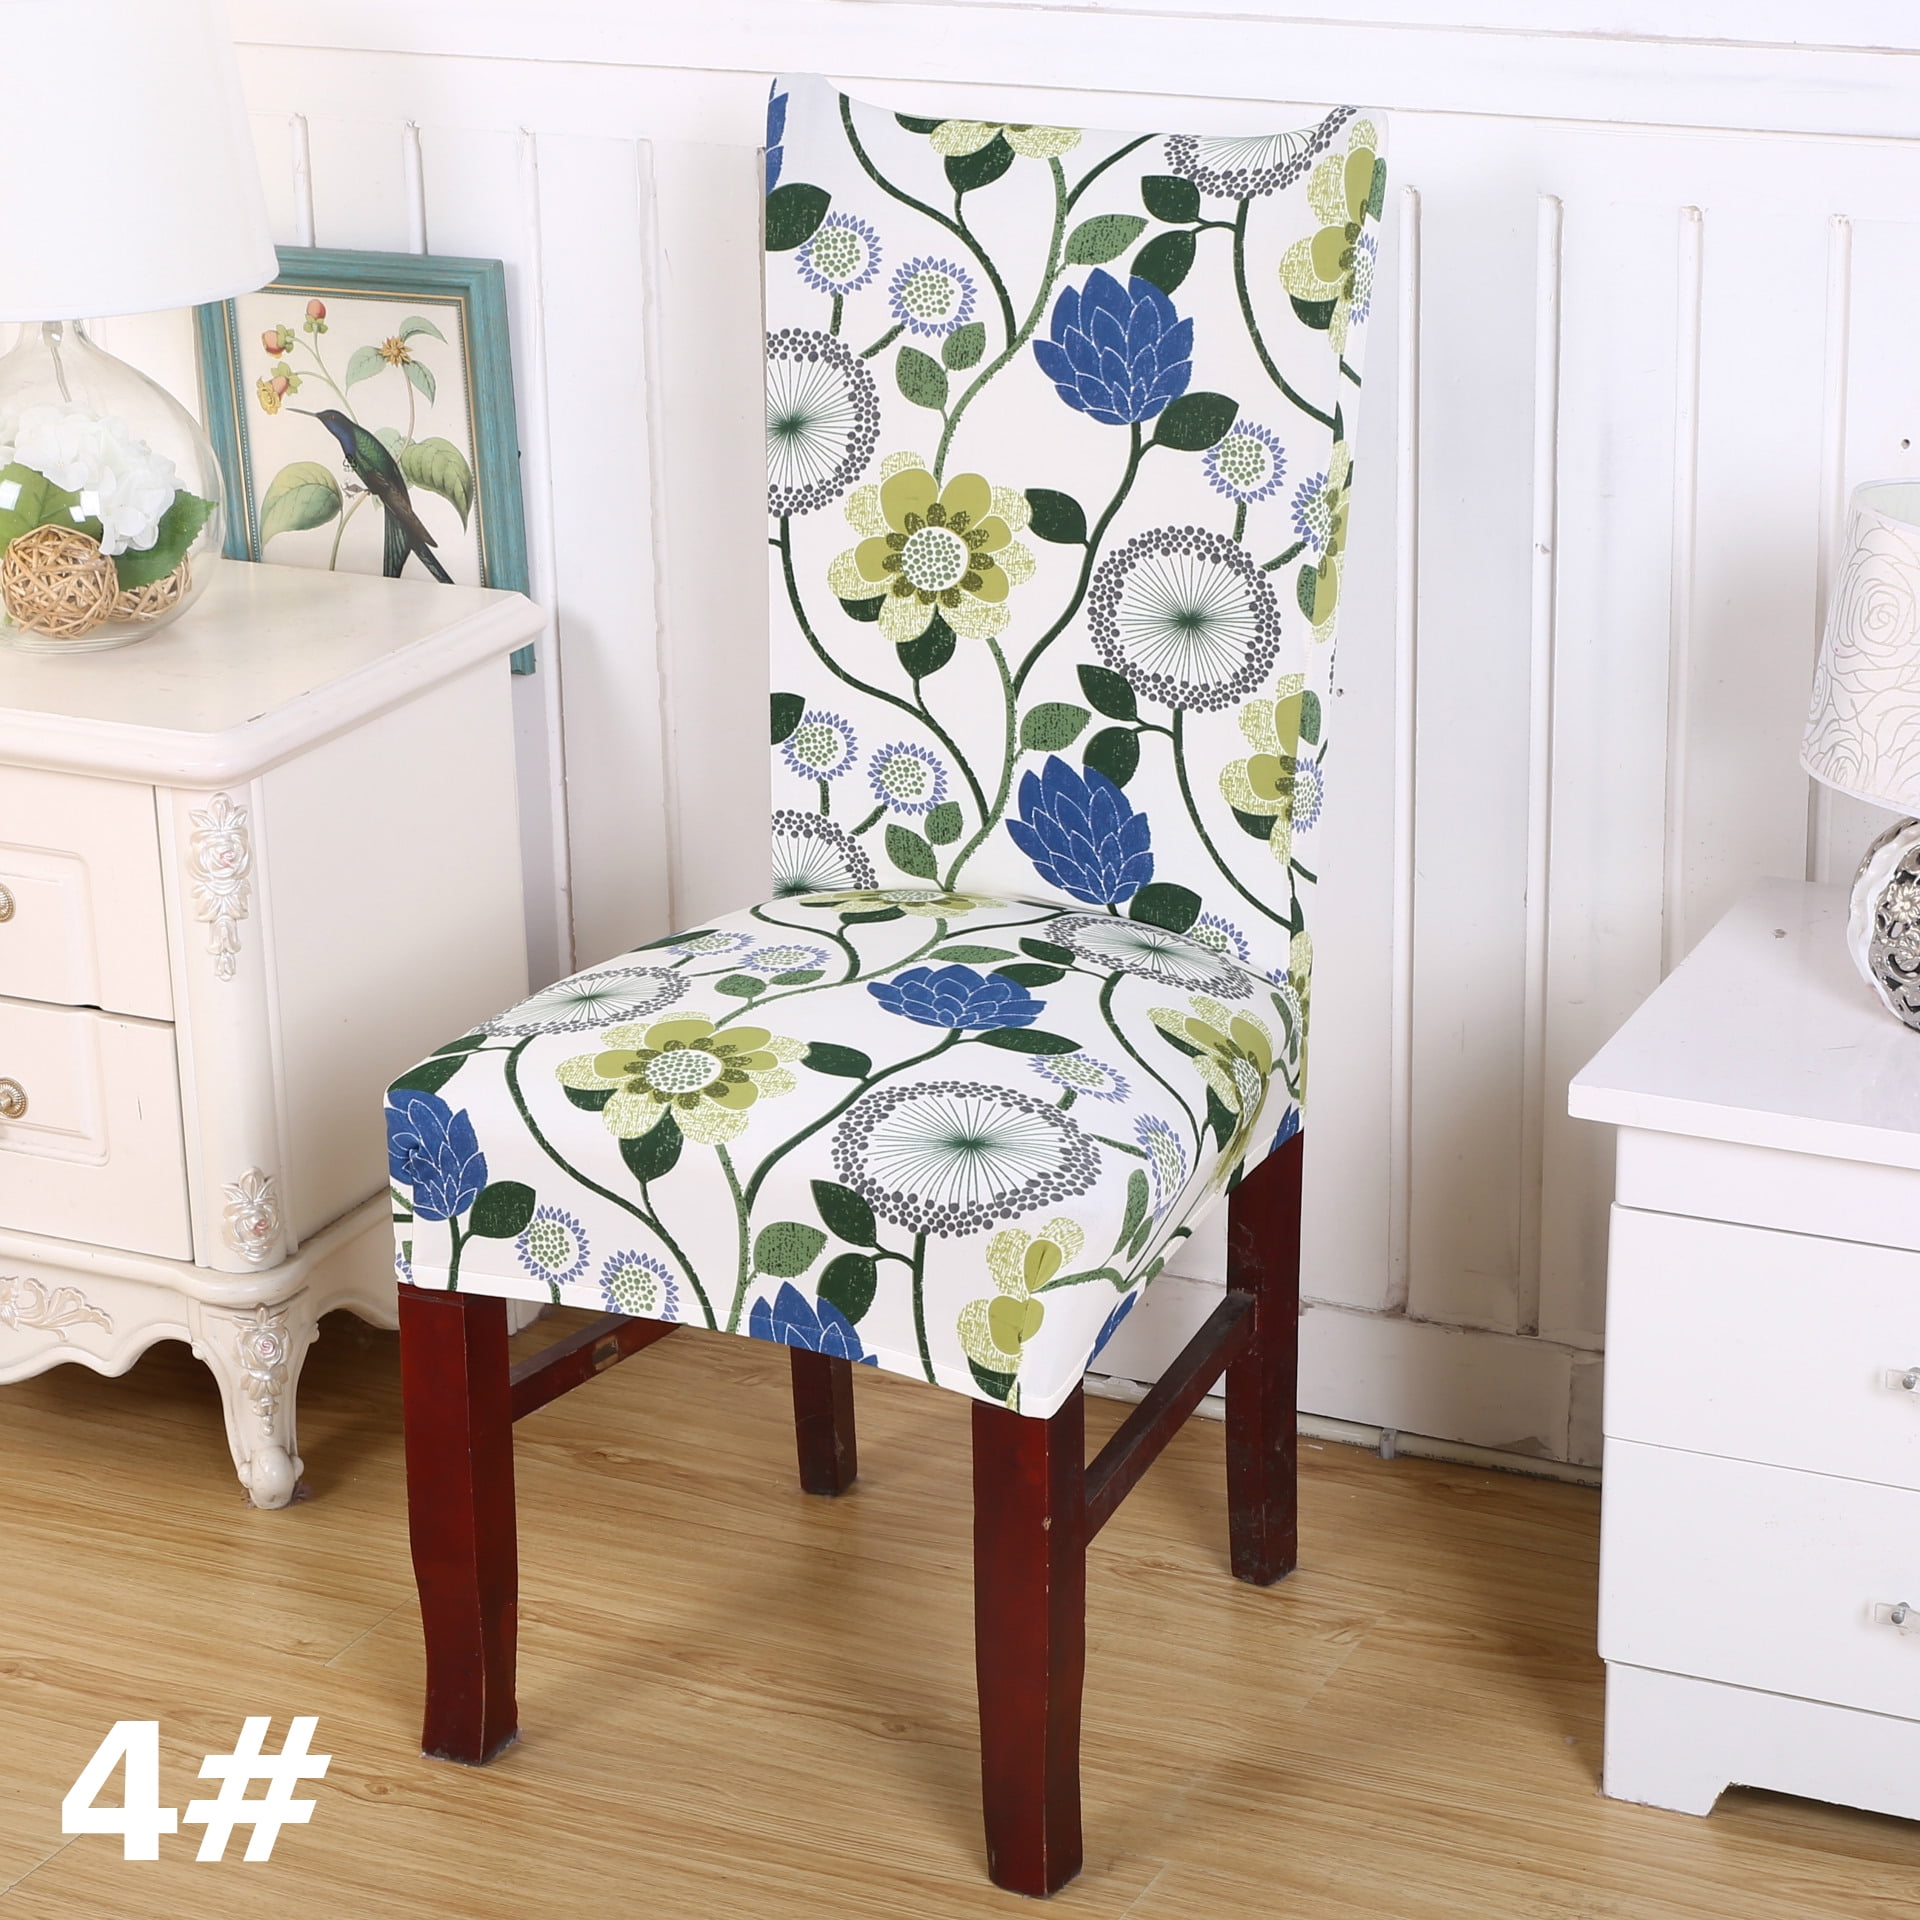 Details about   Geometric Dining Chair Cover Spandex Elastic Chair Slipcover Stretch  Covers 1PC 